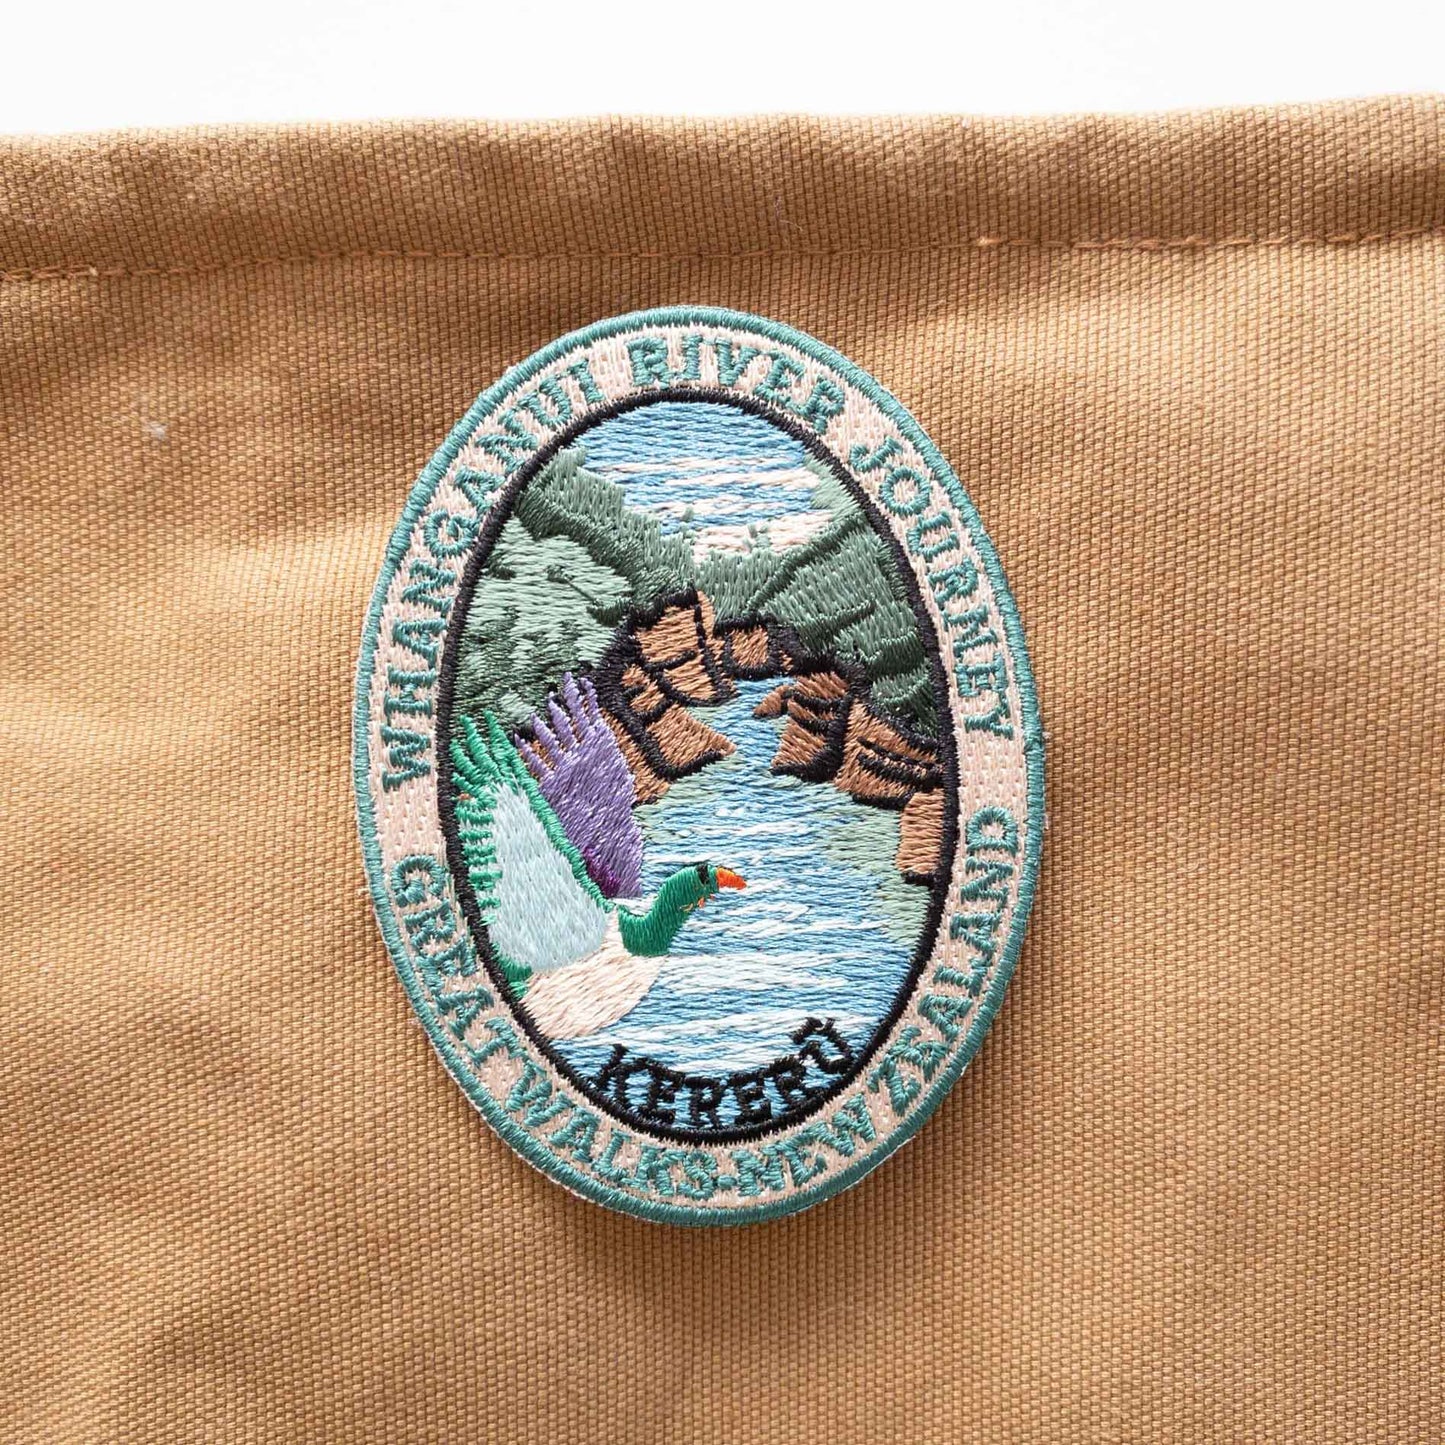 Oval, embroidered Whanganui River Journey Track patch, with a kereru/wood pigeon, green and brown banks and a blue river, on a brown canvas bag.